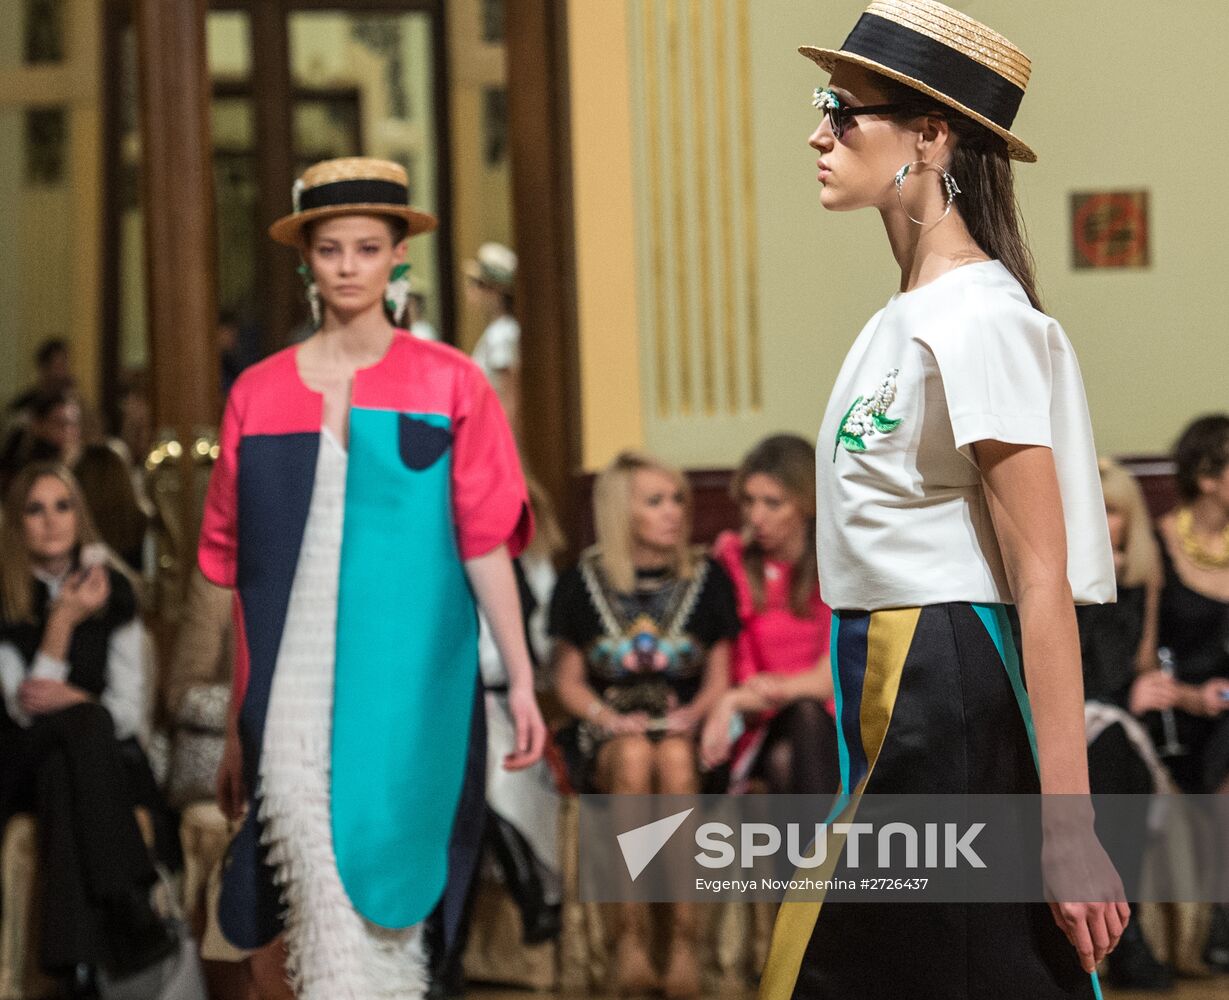 Moscow. Fashion designer Alexander Arutyunov shows off his collection during 'Made in Russia' fashion week